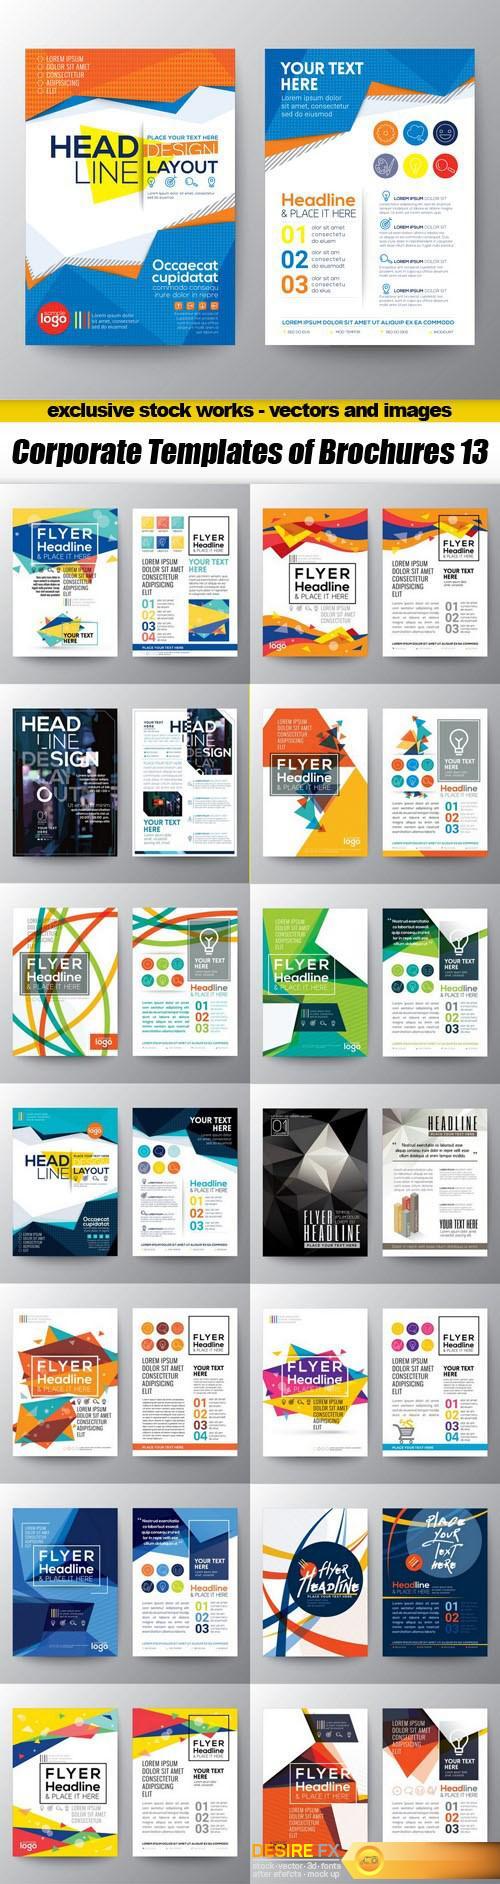 Corporate Templates of Brochures 13 - 15xEPS